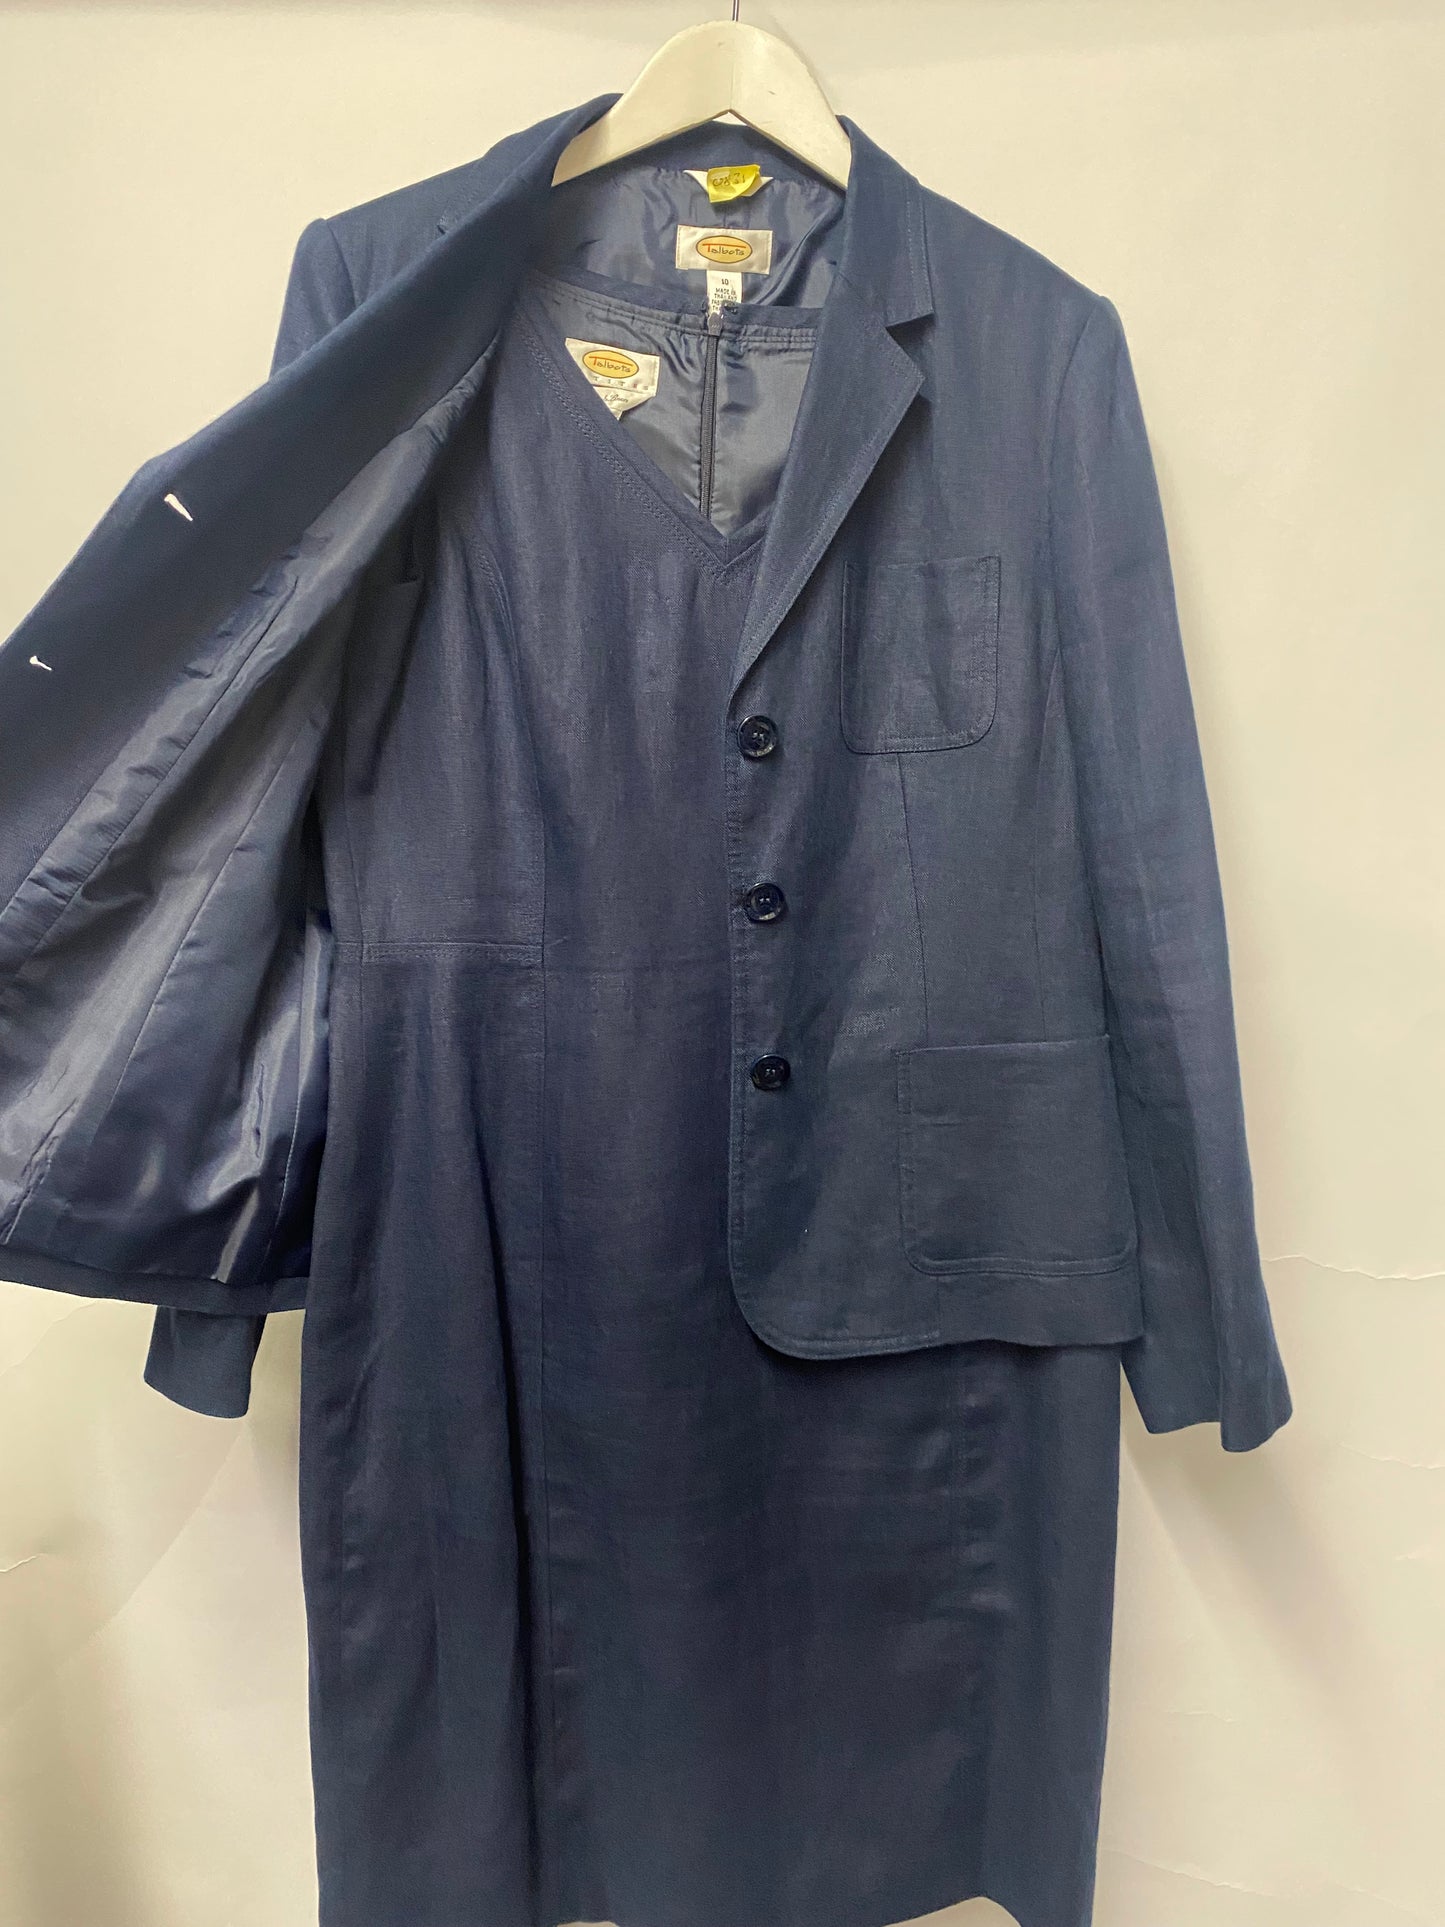 Talbots Navy Linen Dress and Jacket Suit 10